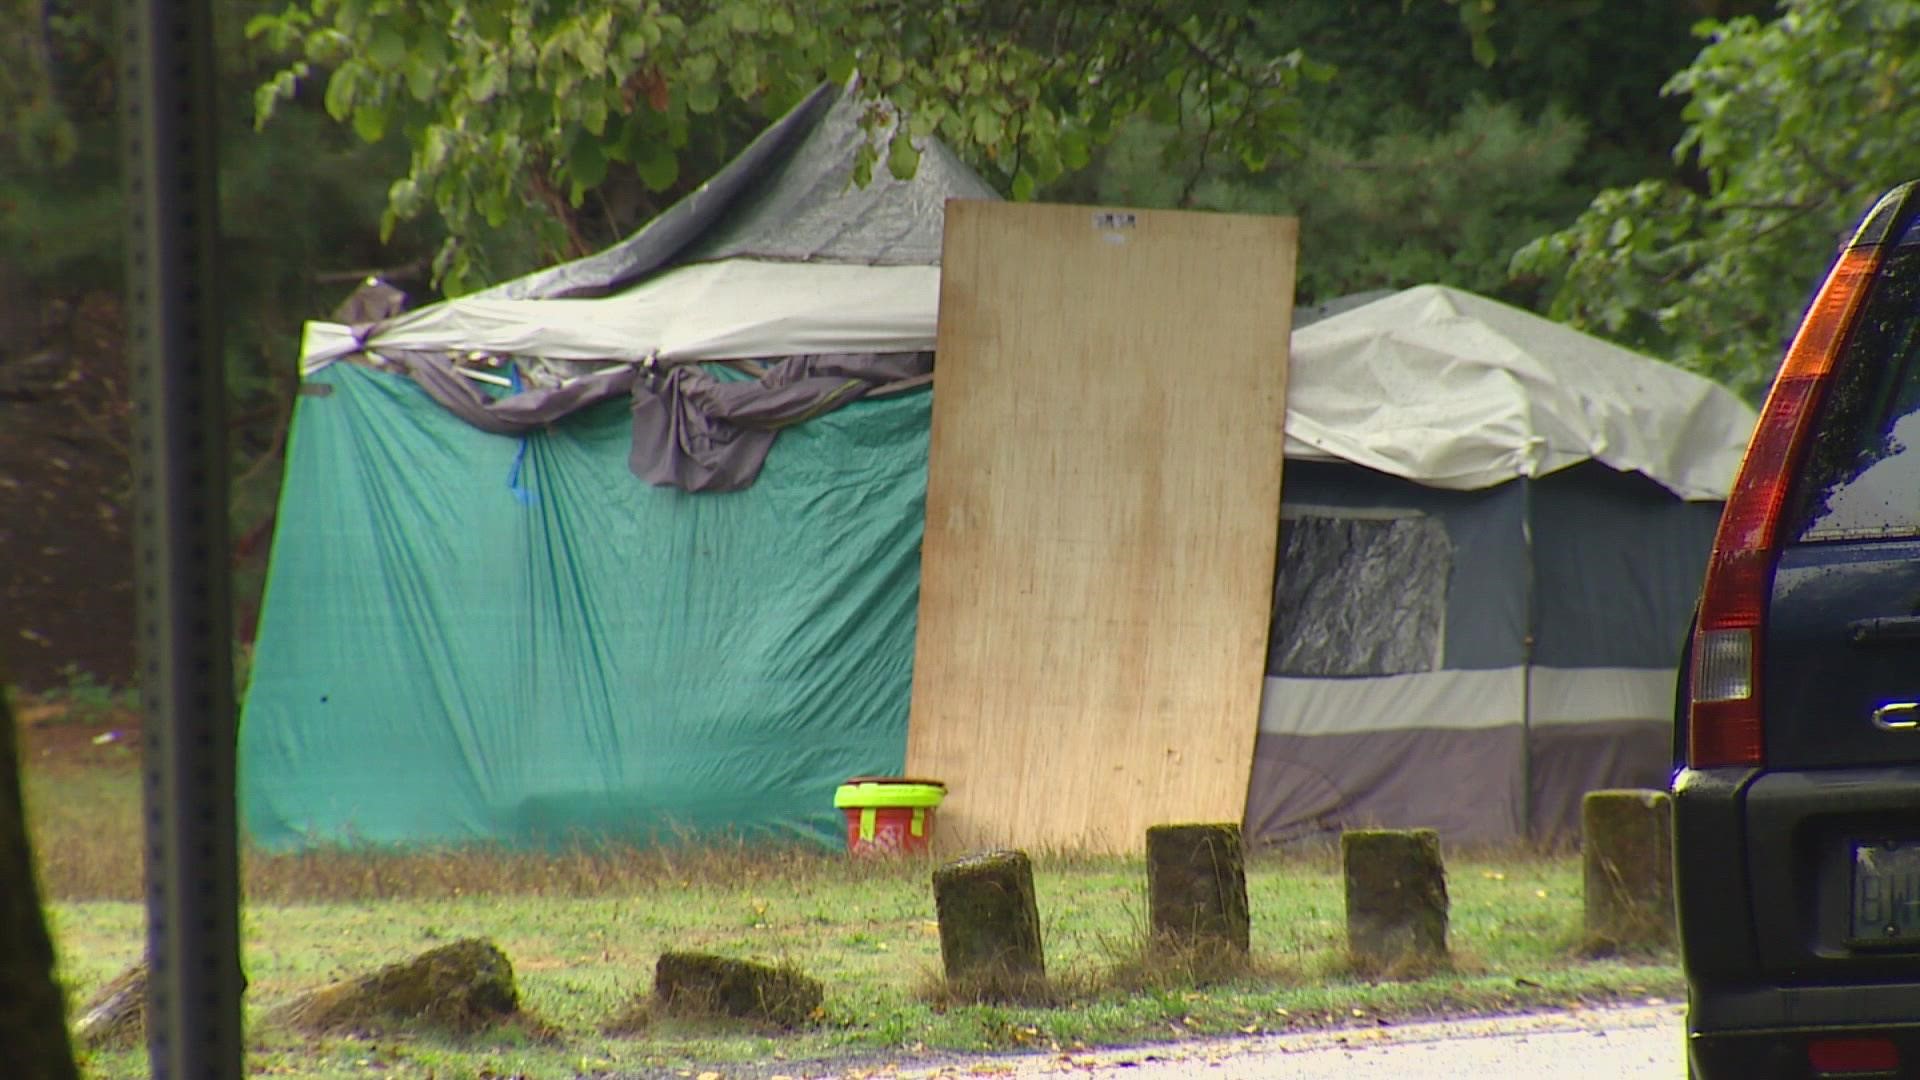 Seattle Parks and Recreation said that outreach has begun for those living unsheltered at Green Lake Park